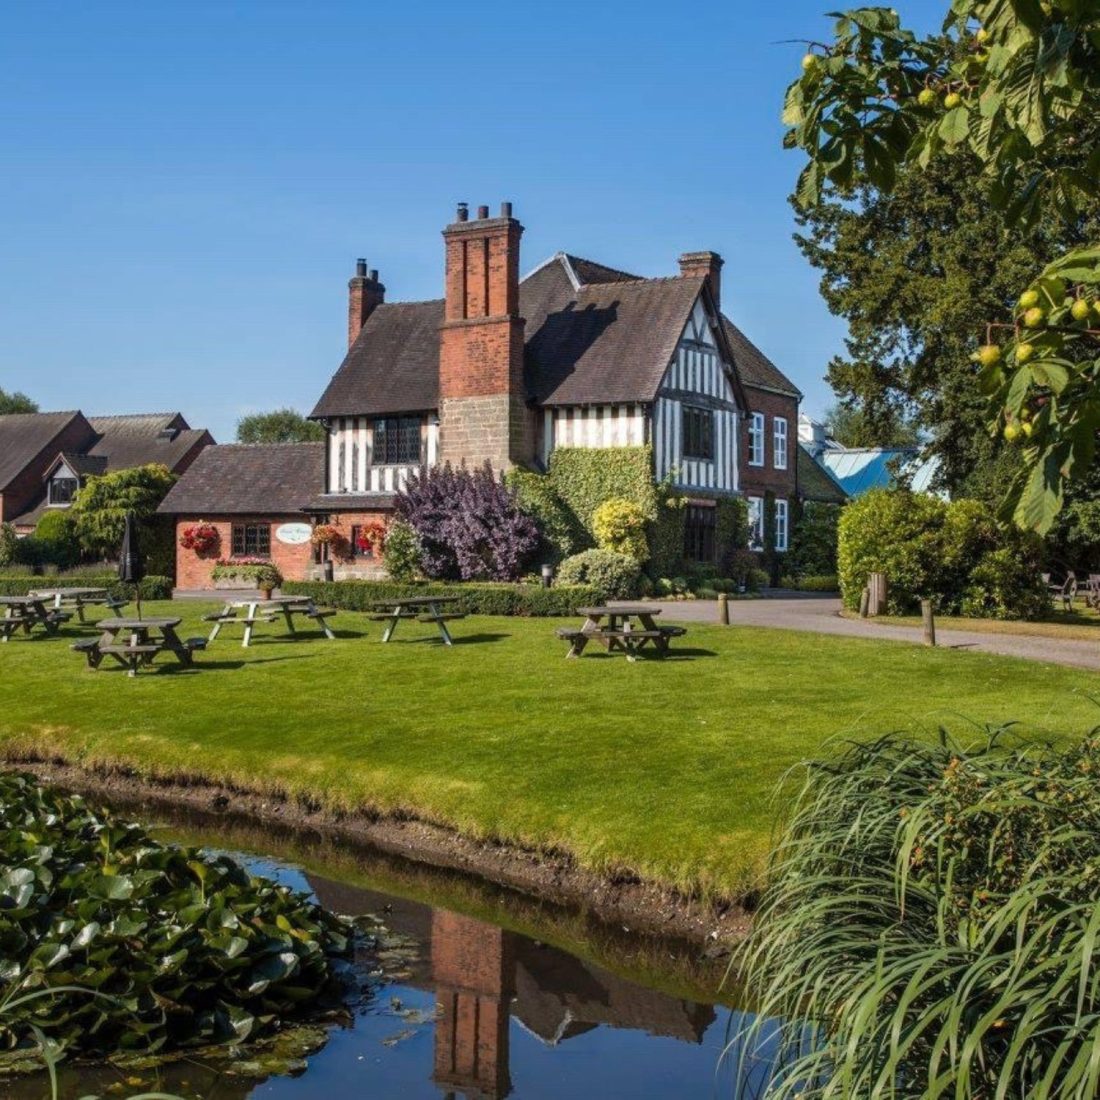 Review: The Moat House, Acton Trussell